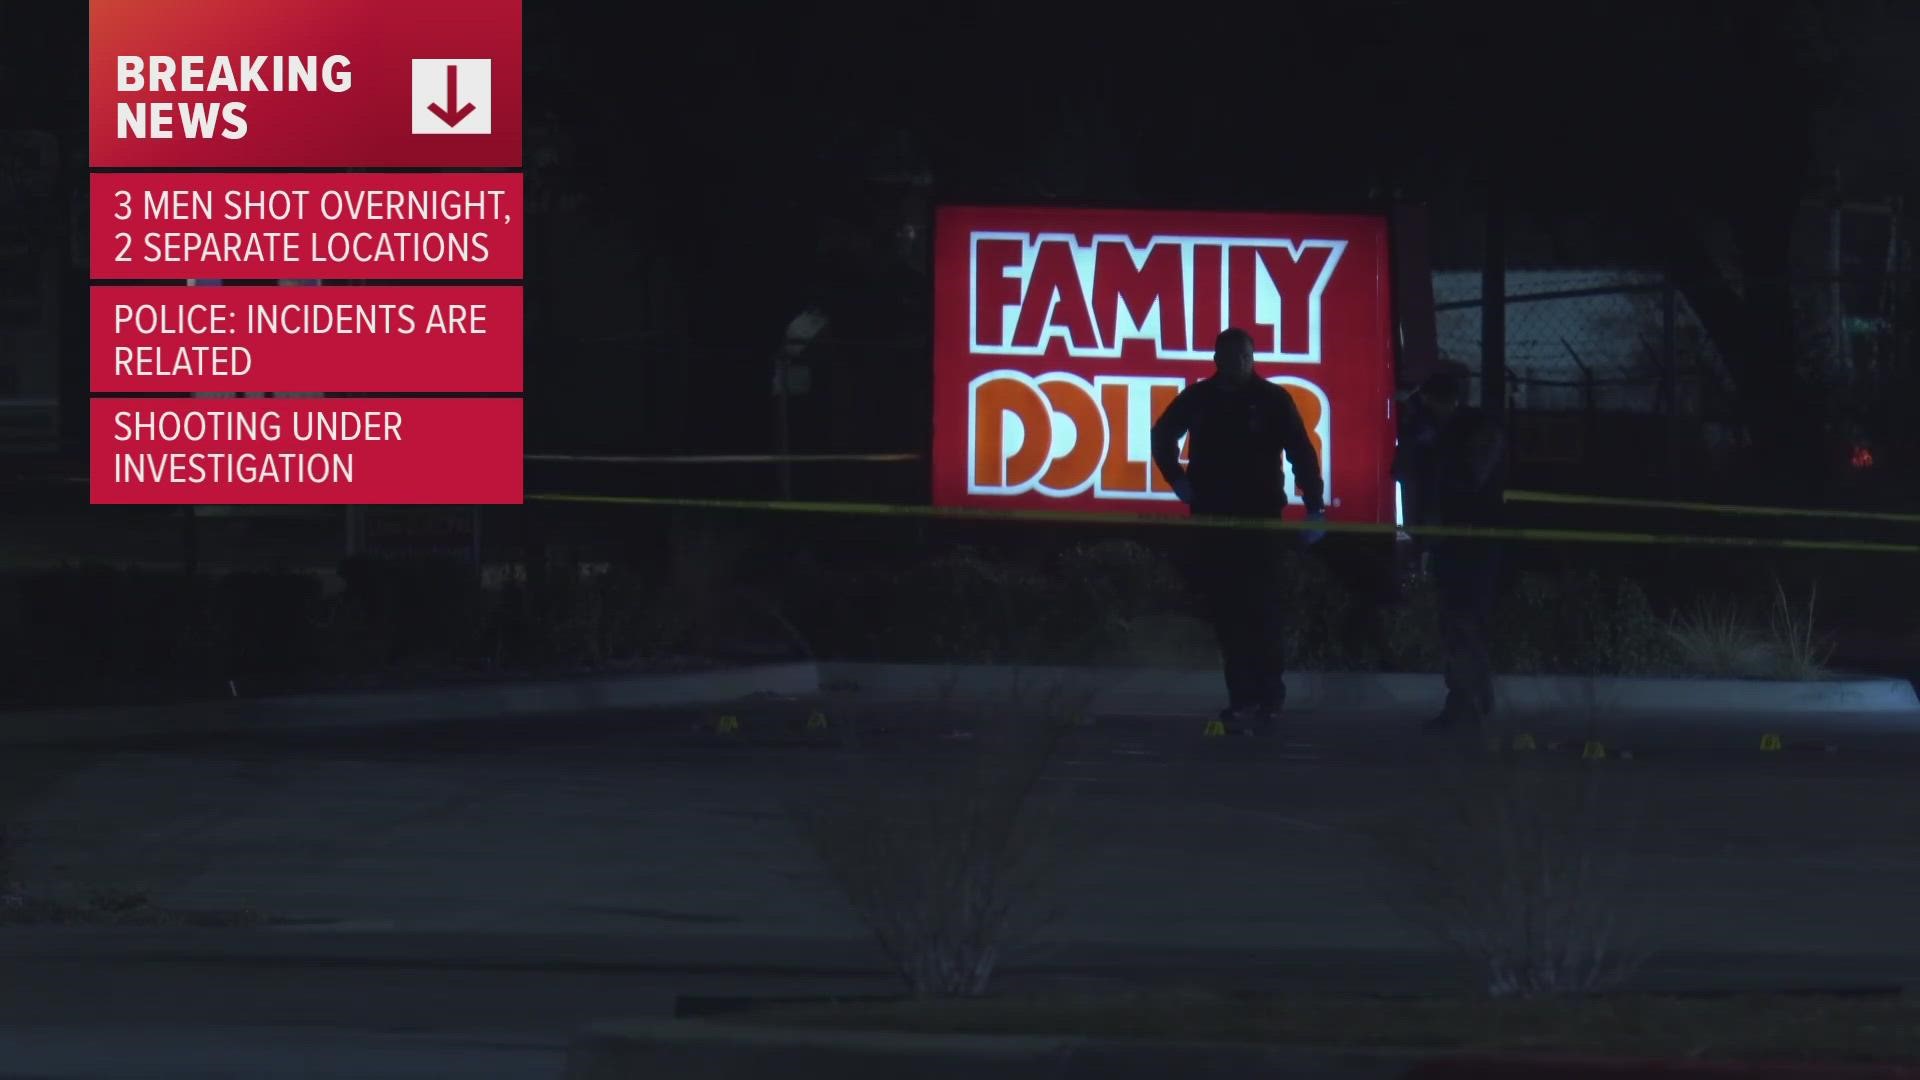 Police say the shootings are related. The first happened at the Family Dollar on Hemphill Street. The other was at the intersection of South Fwy and Atlamesa Blvd.